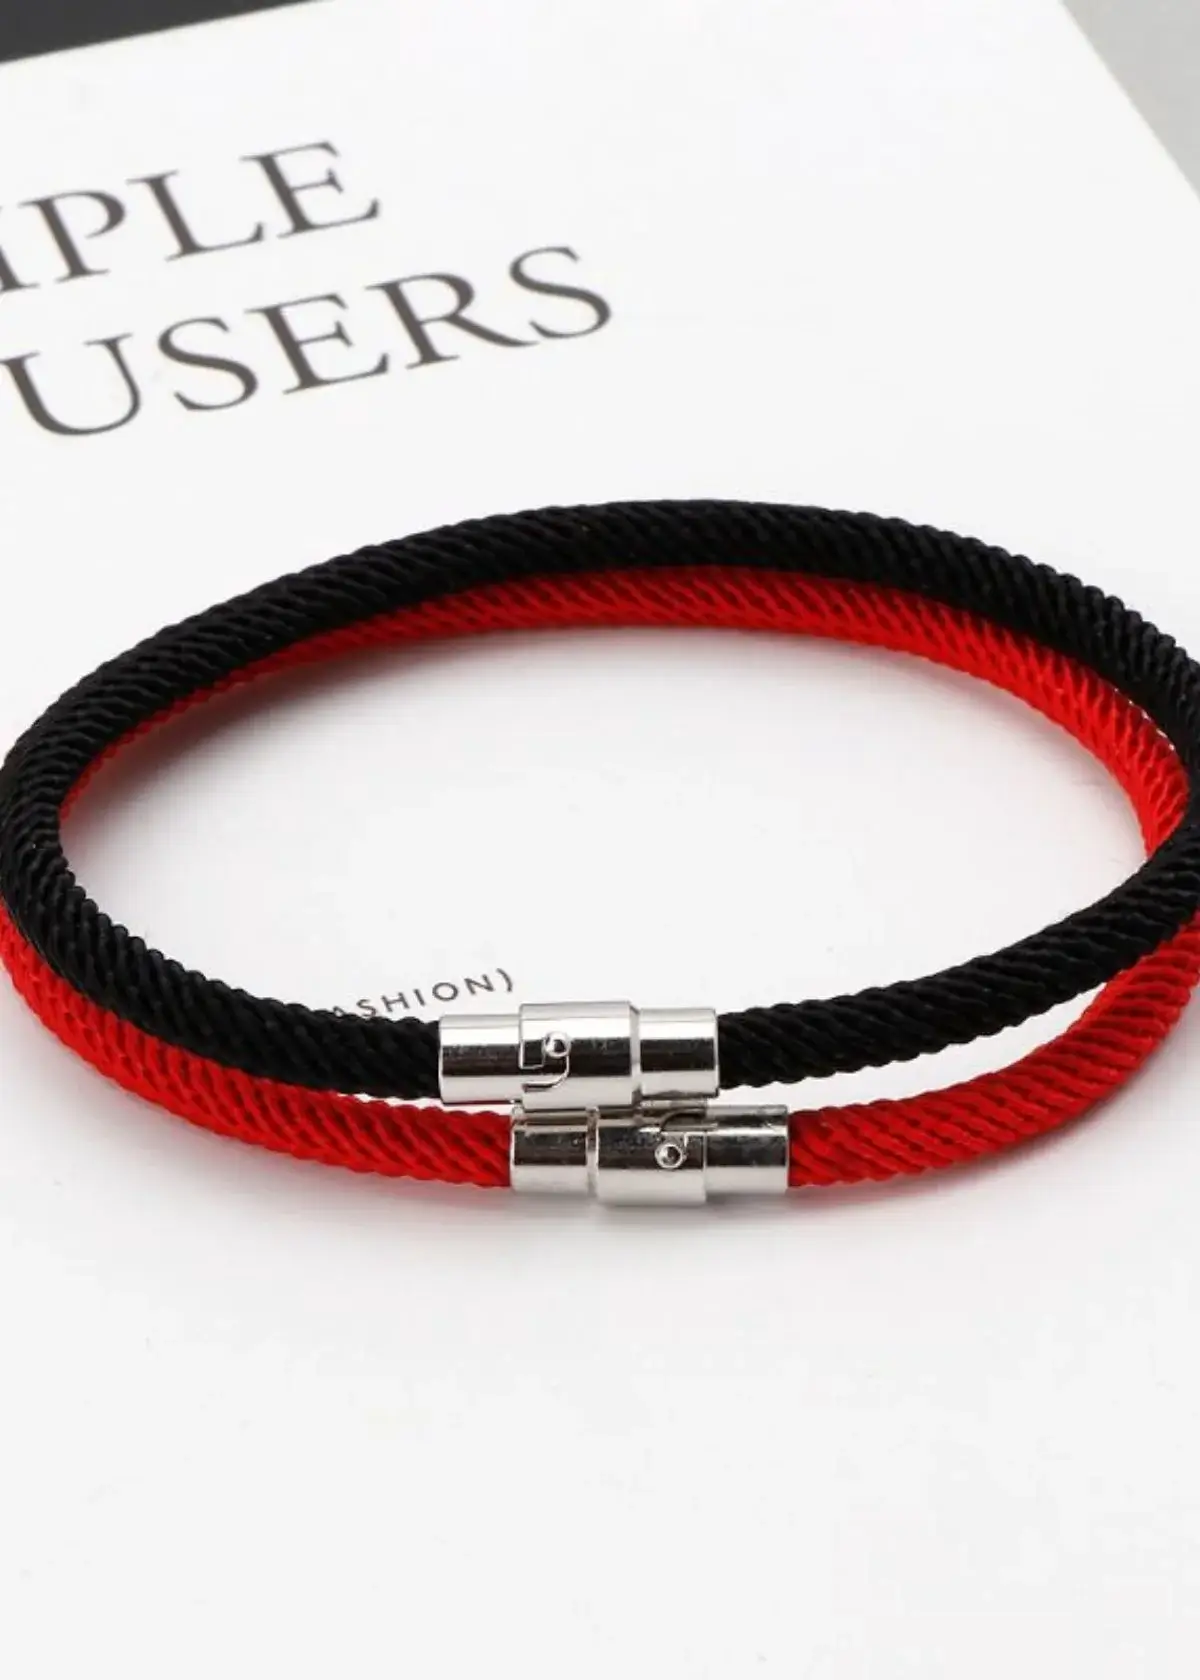 How to Choose the Right Red and Black Bracelet?